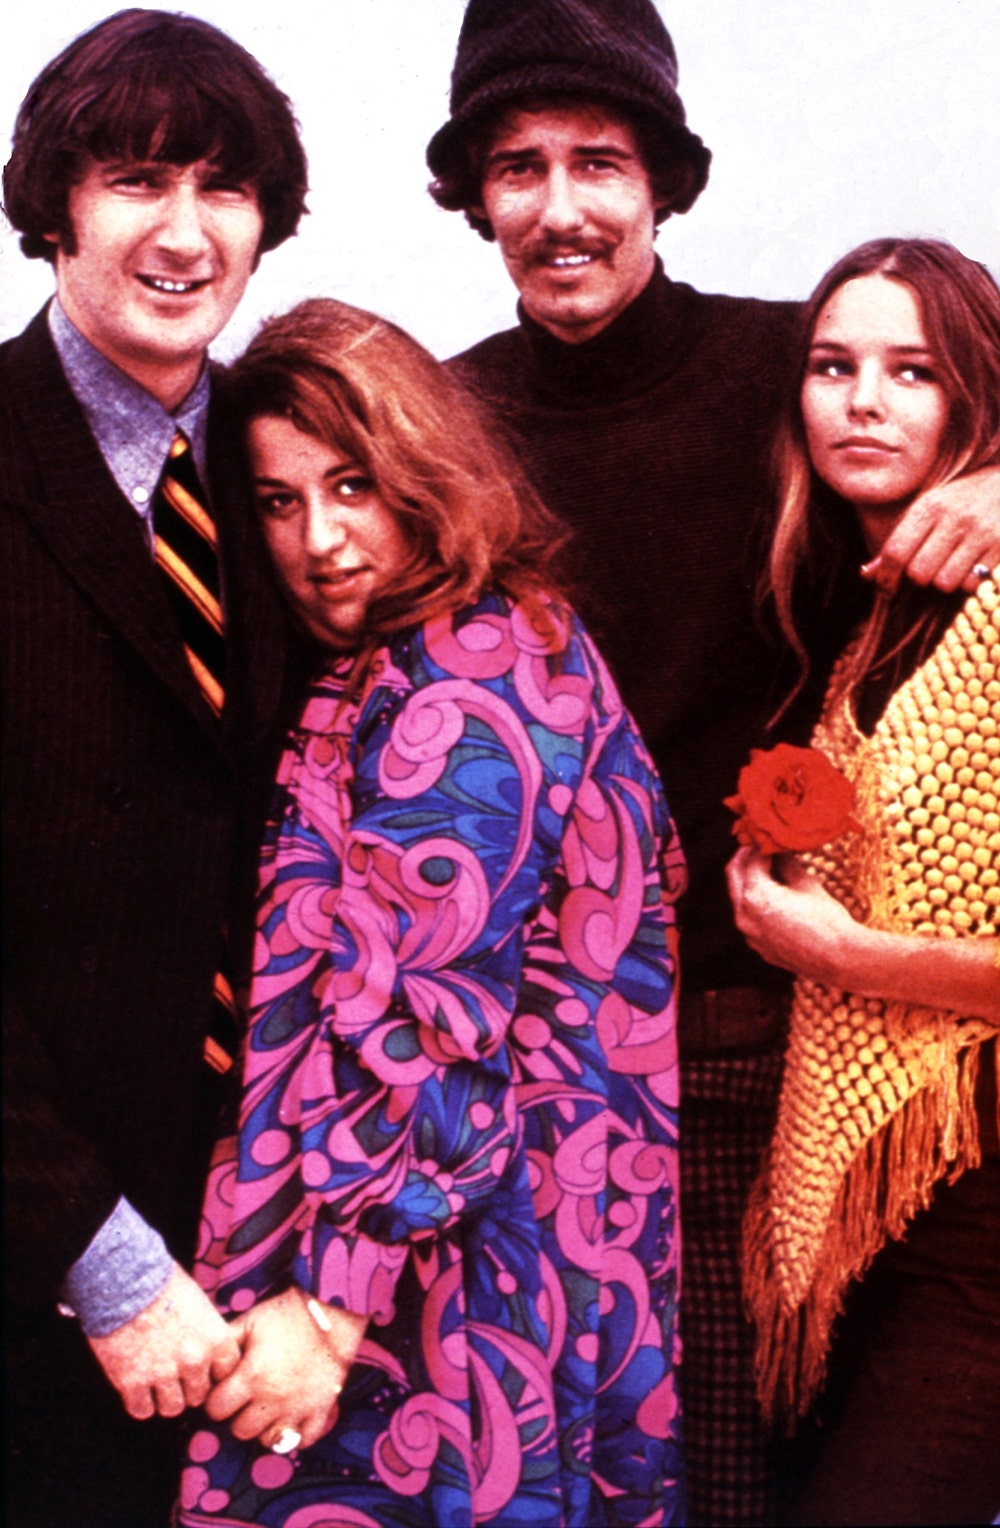 A colored photo of the Mamas and the Papas wearing 60s fashion